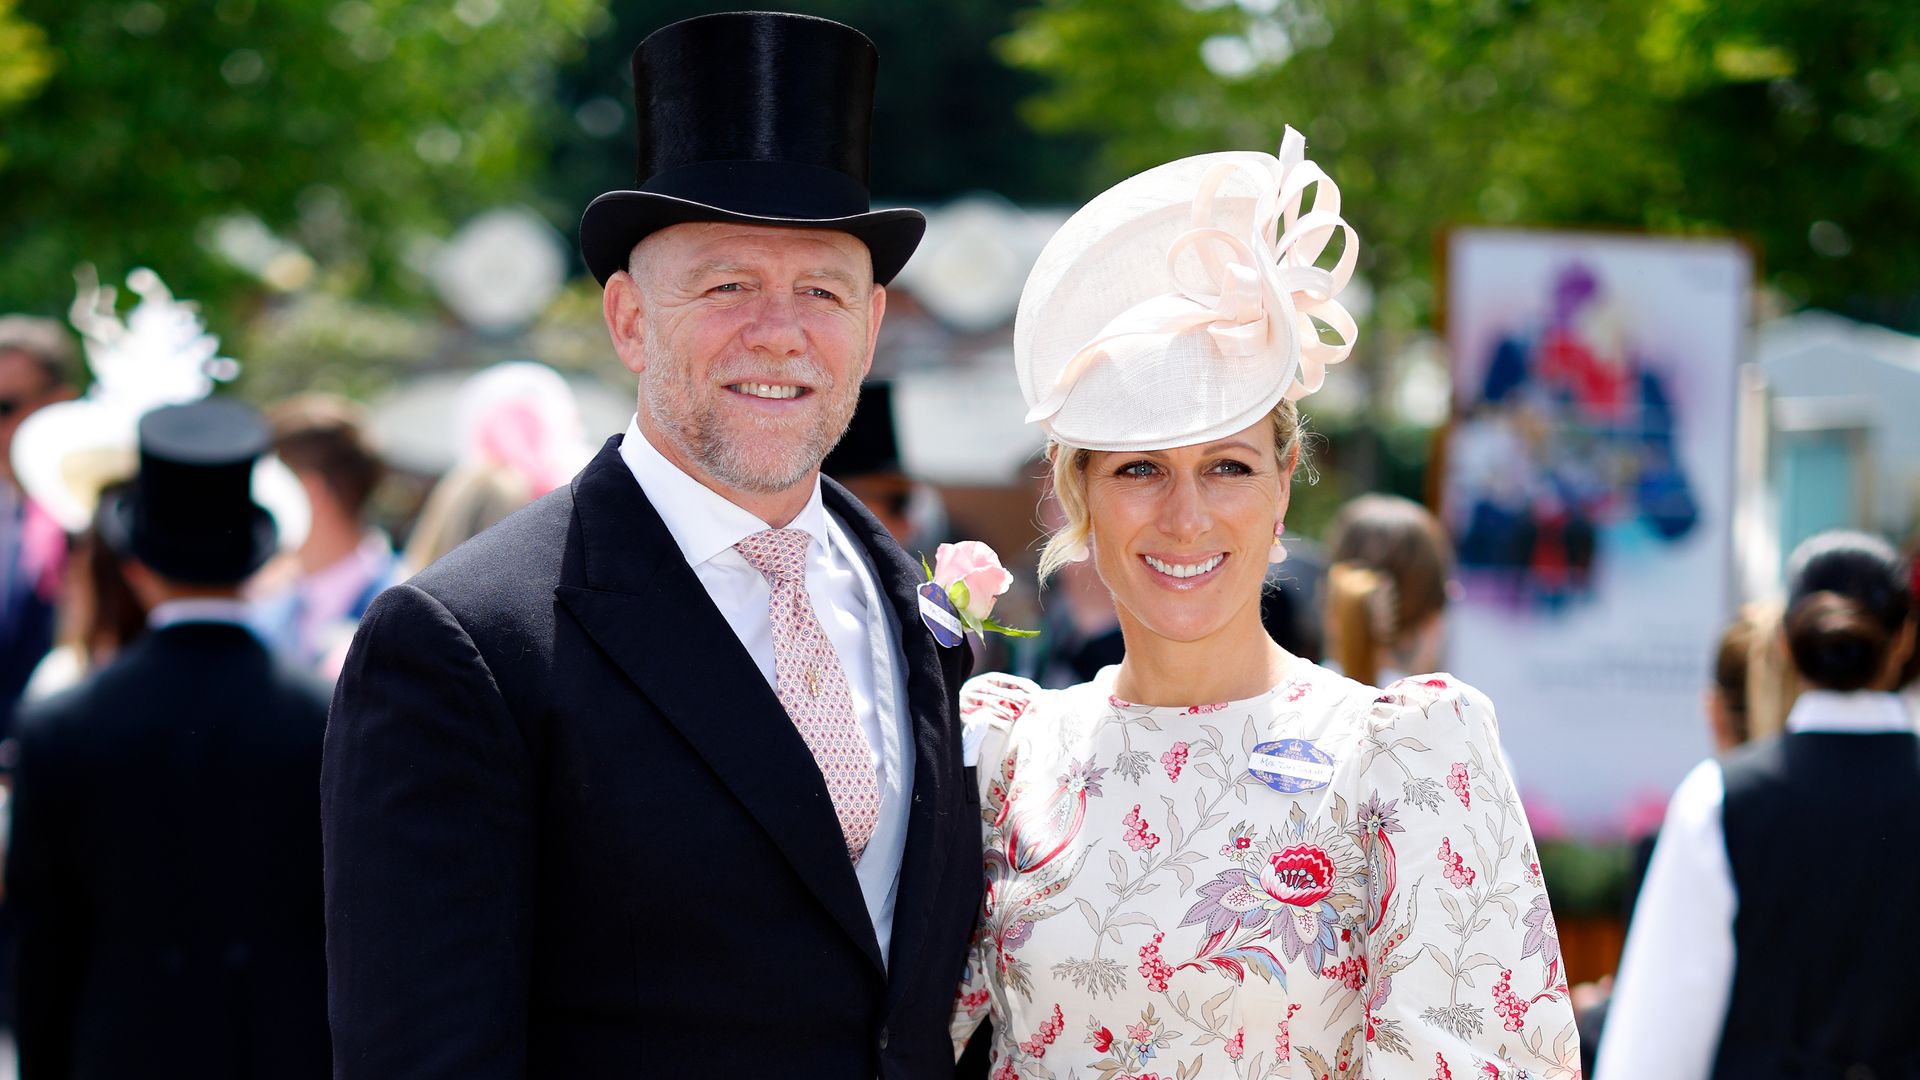 ASCOT, UNITED KINGDOM - JUNE 19: (EMBARGOED FOR PUBLICATION IN UK NEWSPAPERS UNTIL 24 HOURS AFTER CREATE DATE AND TIME) Mike Tindall and Zara Tindall attend day two of Royal Ascot 2024 at Ascot Racecourse on June 19, 2024 in Ascot, England. (Photo by Max Mumby/Indigo/Getty Images)